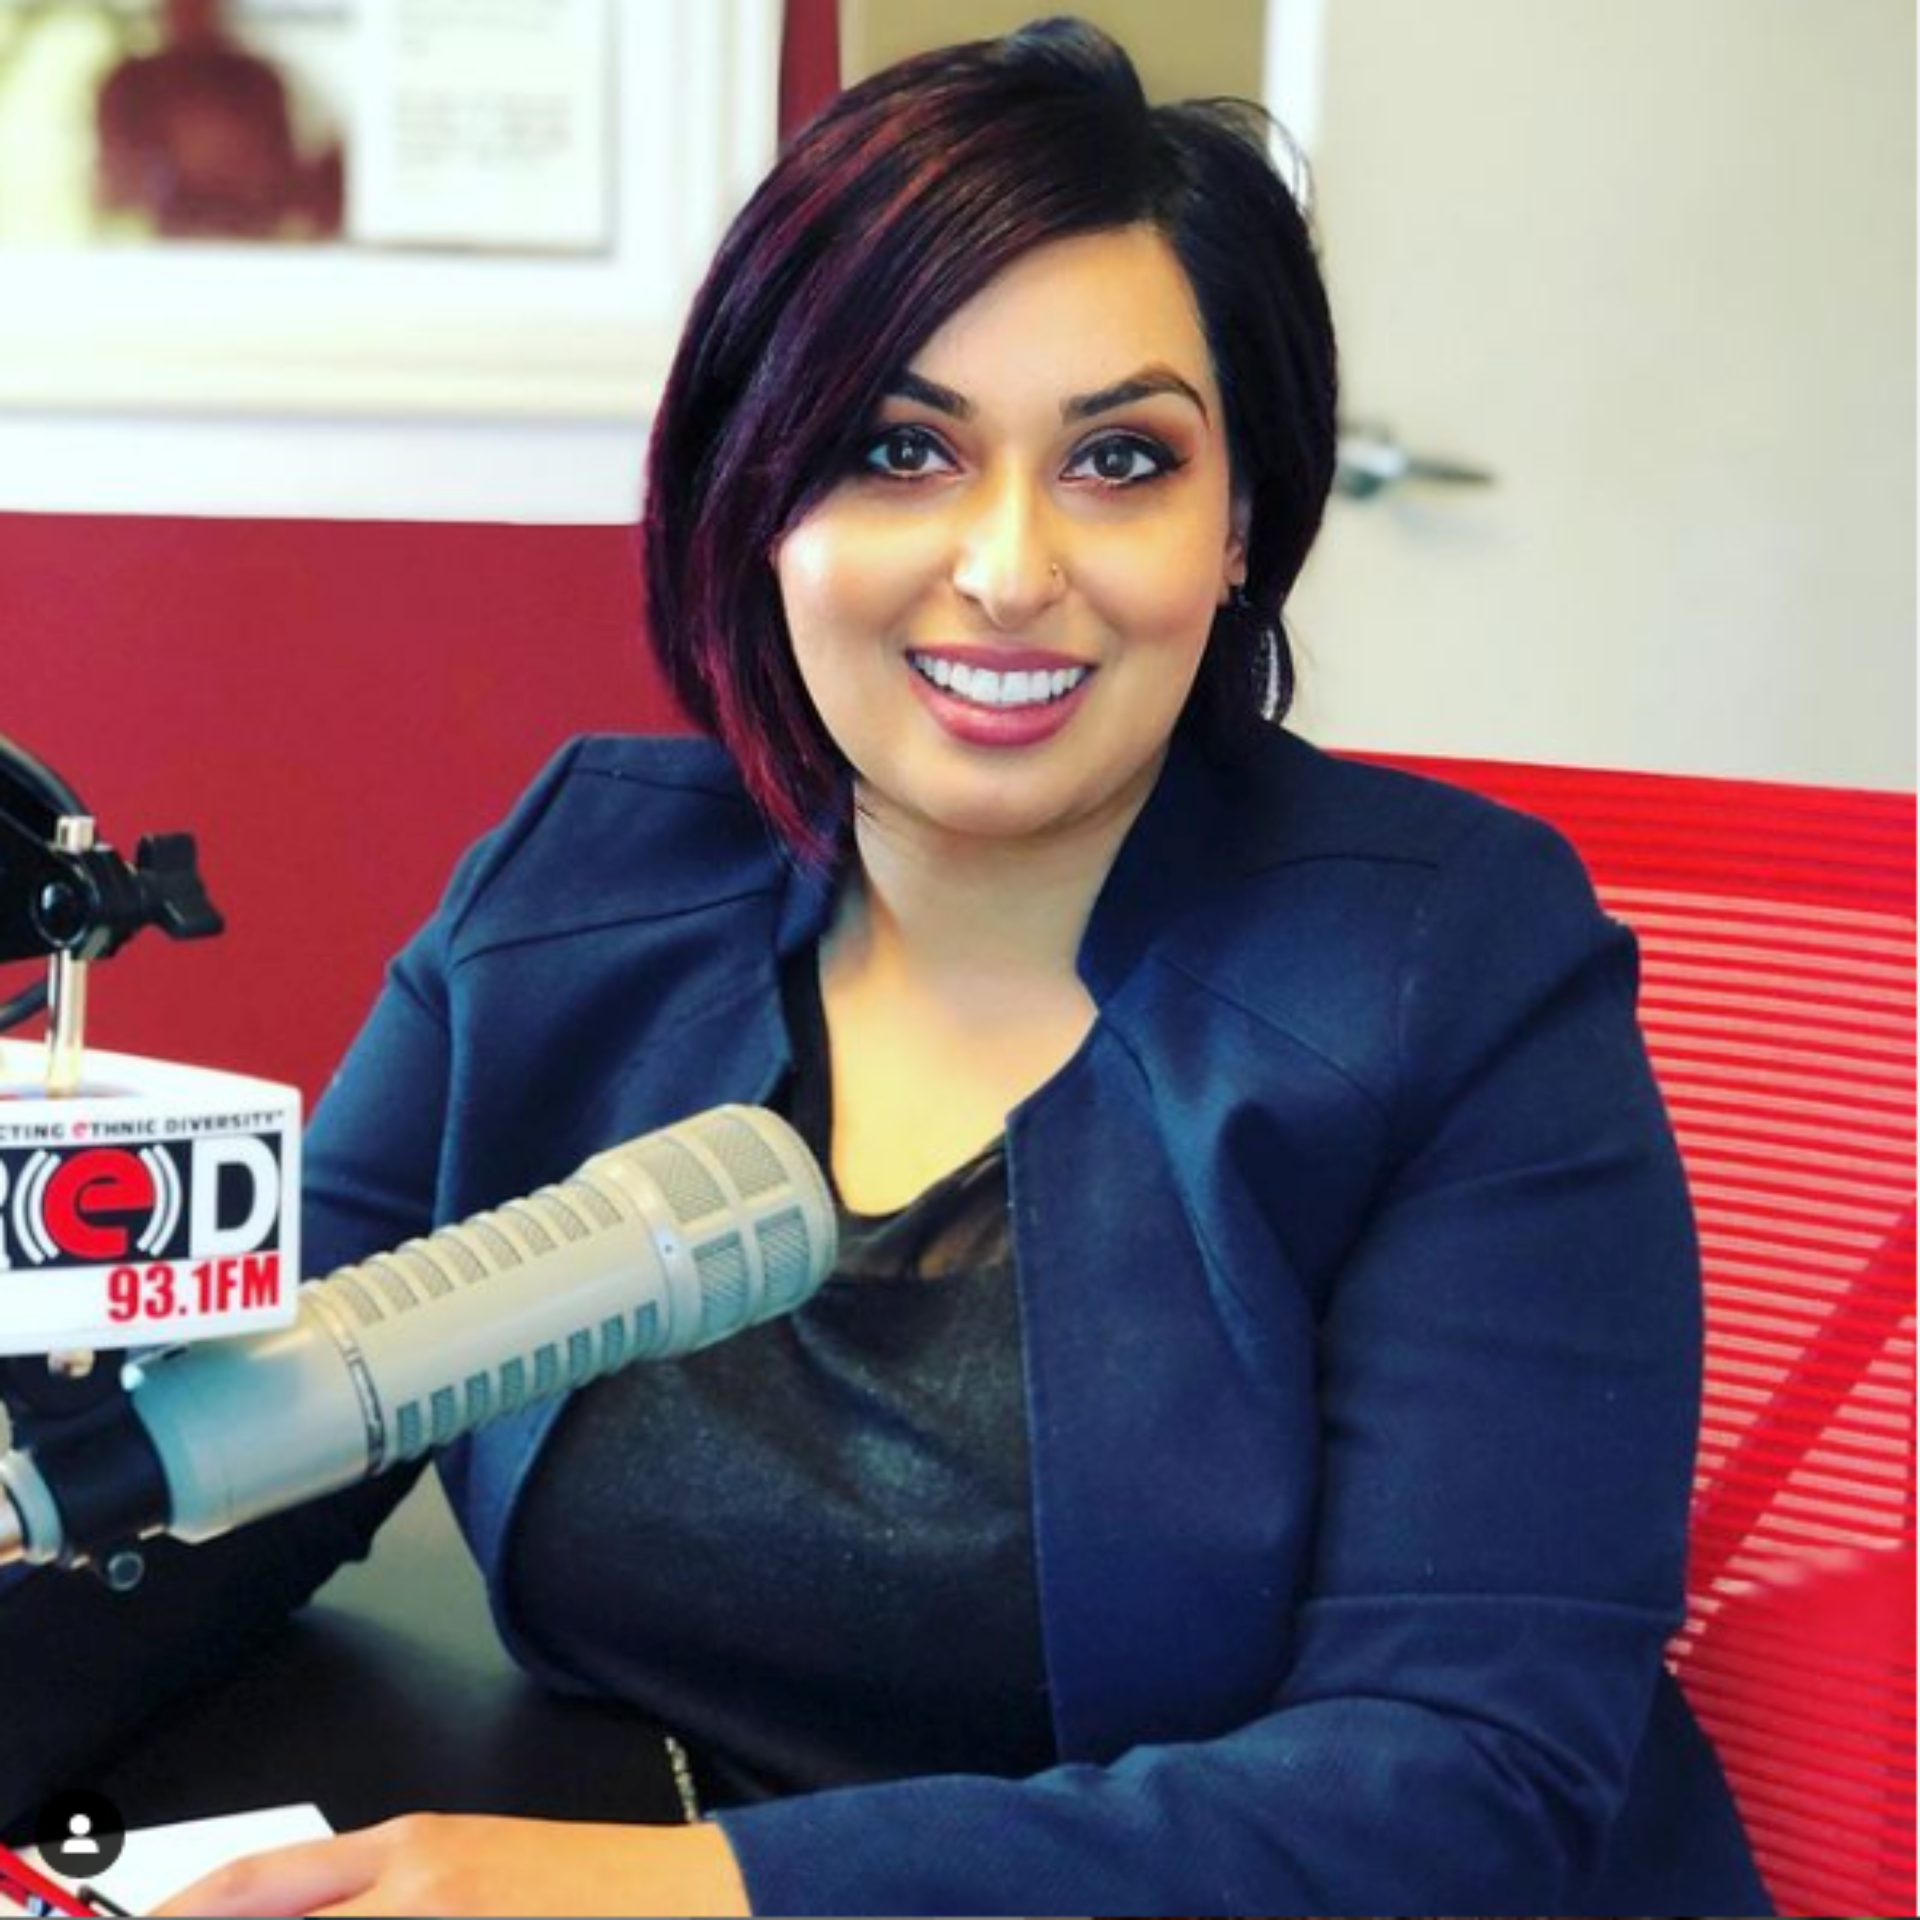 A woman sitting in front of a microphone that says 93.1 fm.